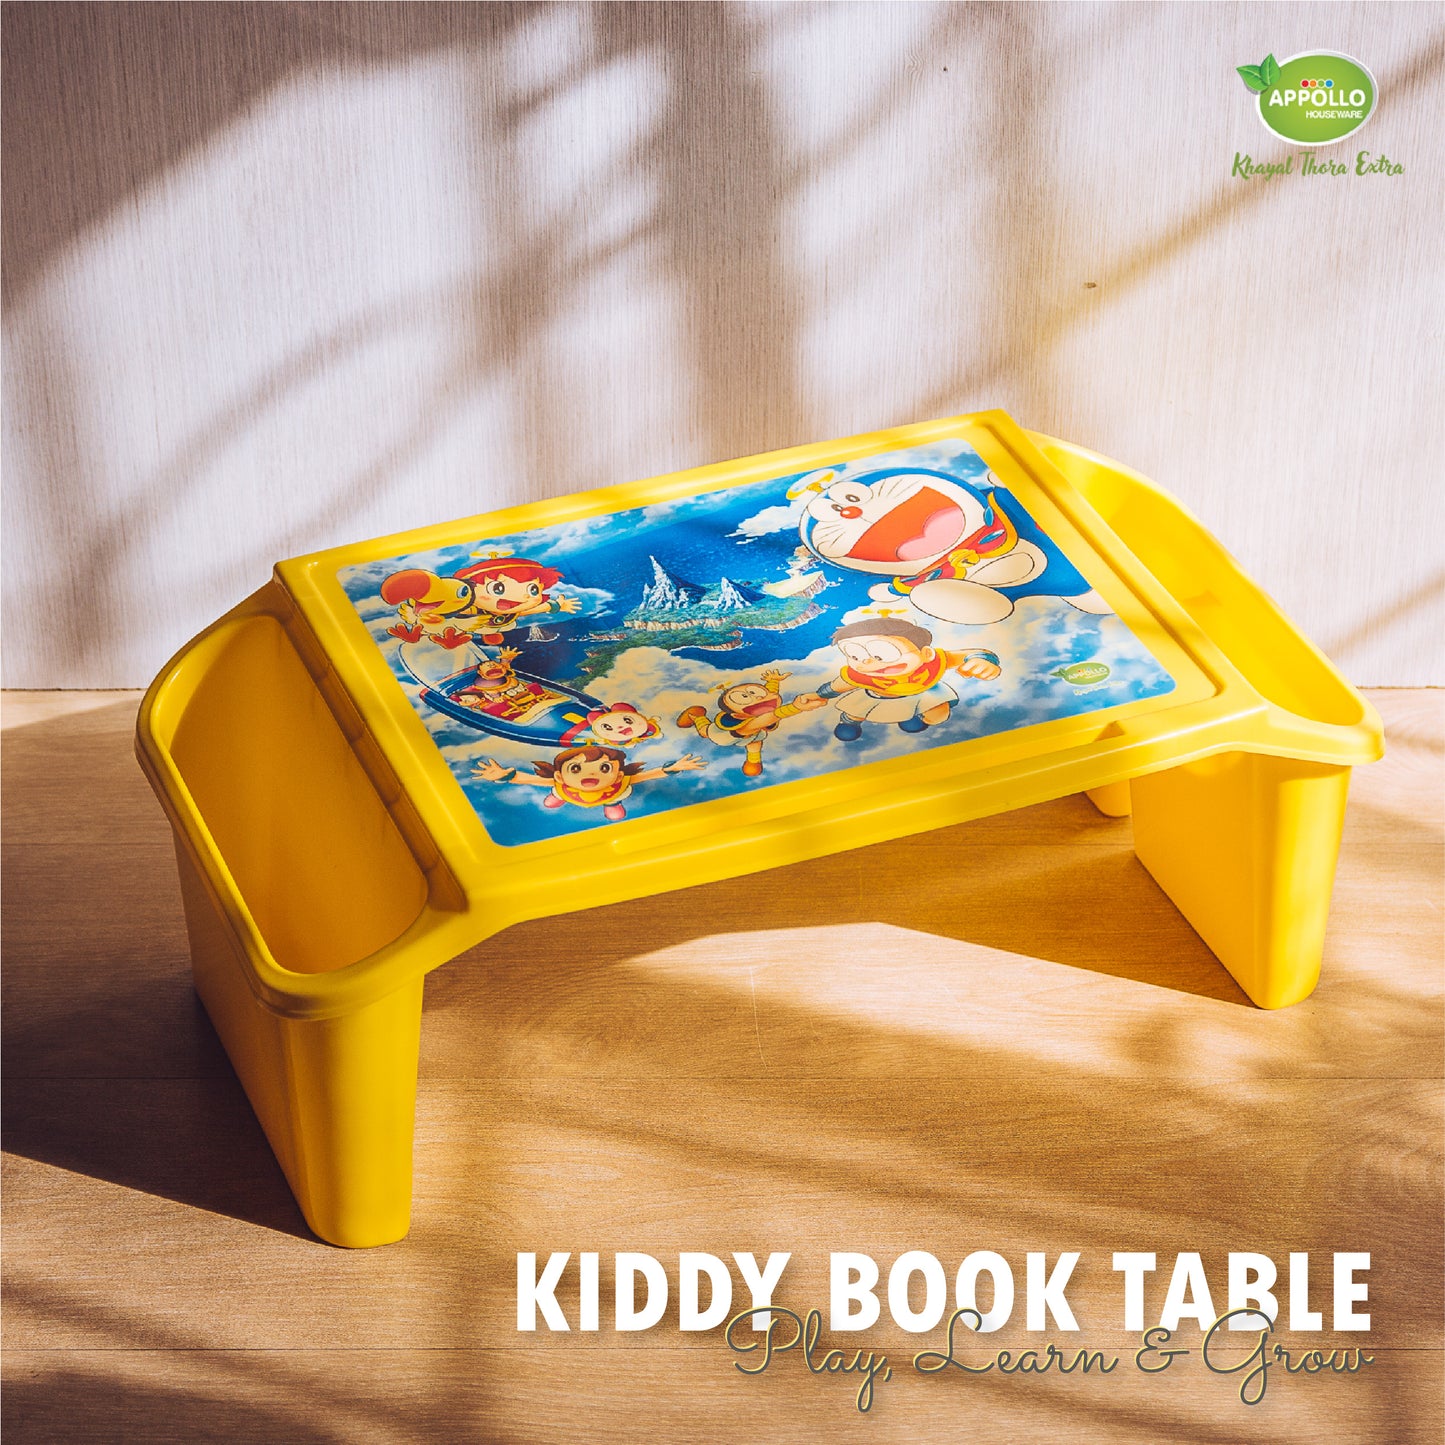 Kiddy Book Table 3 pc set with sticker